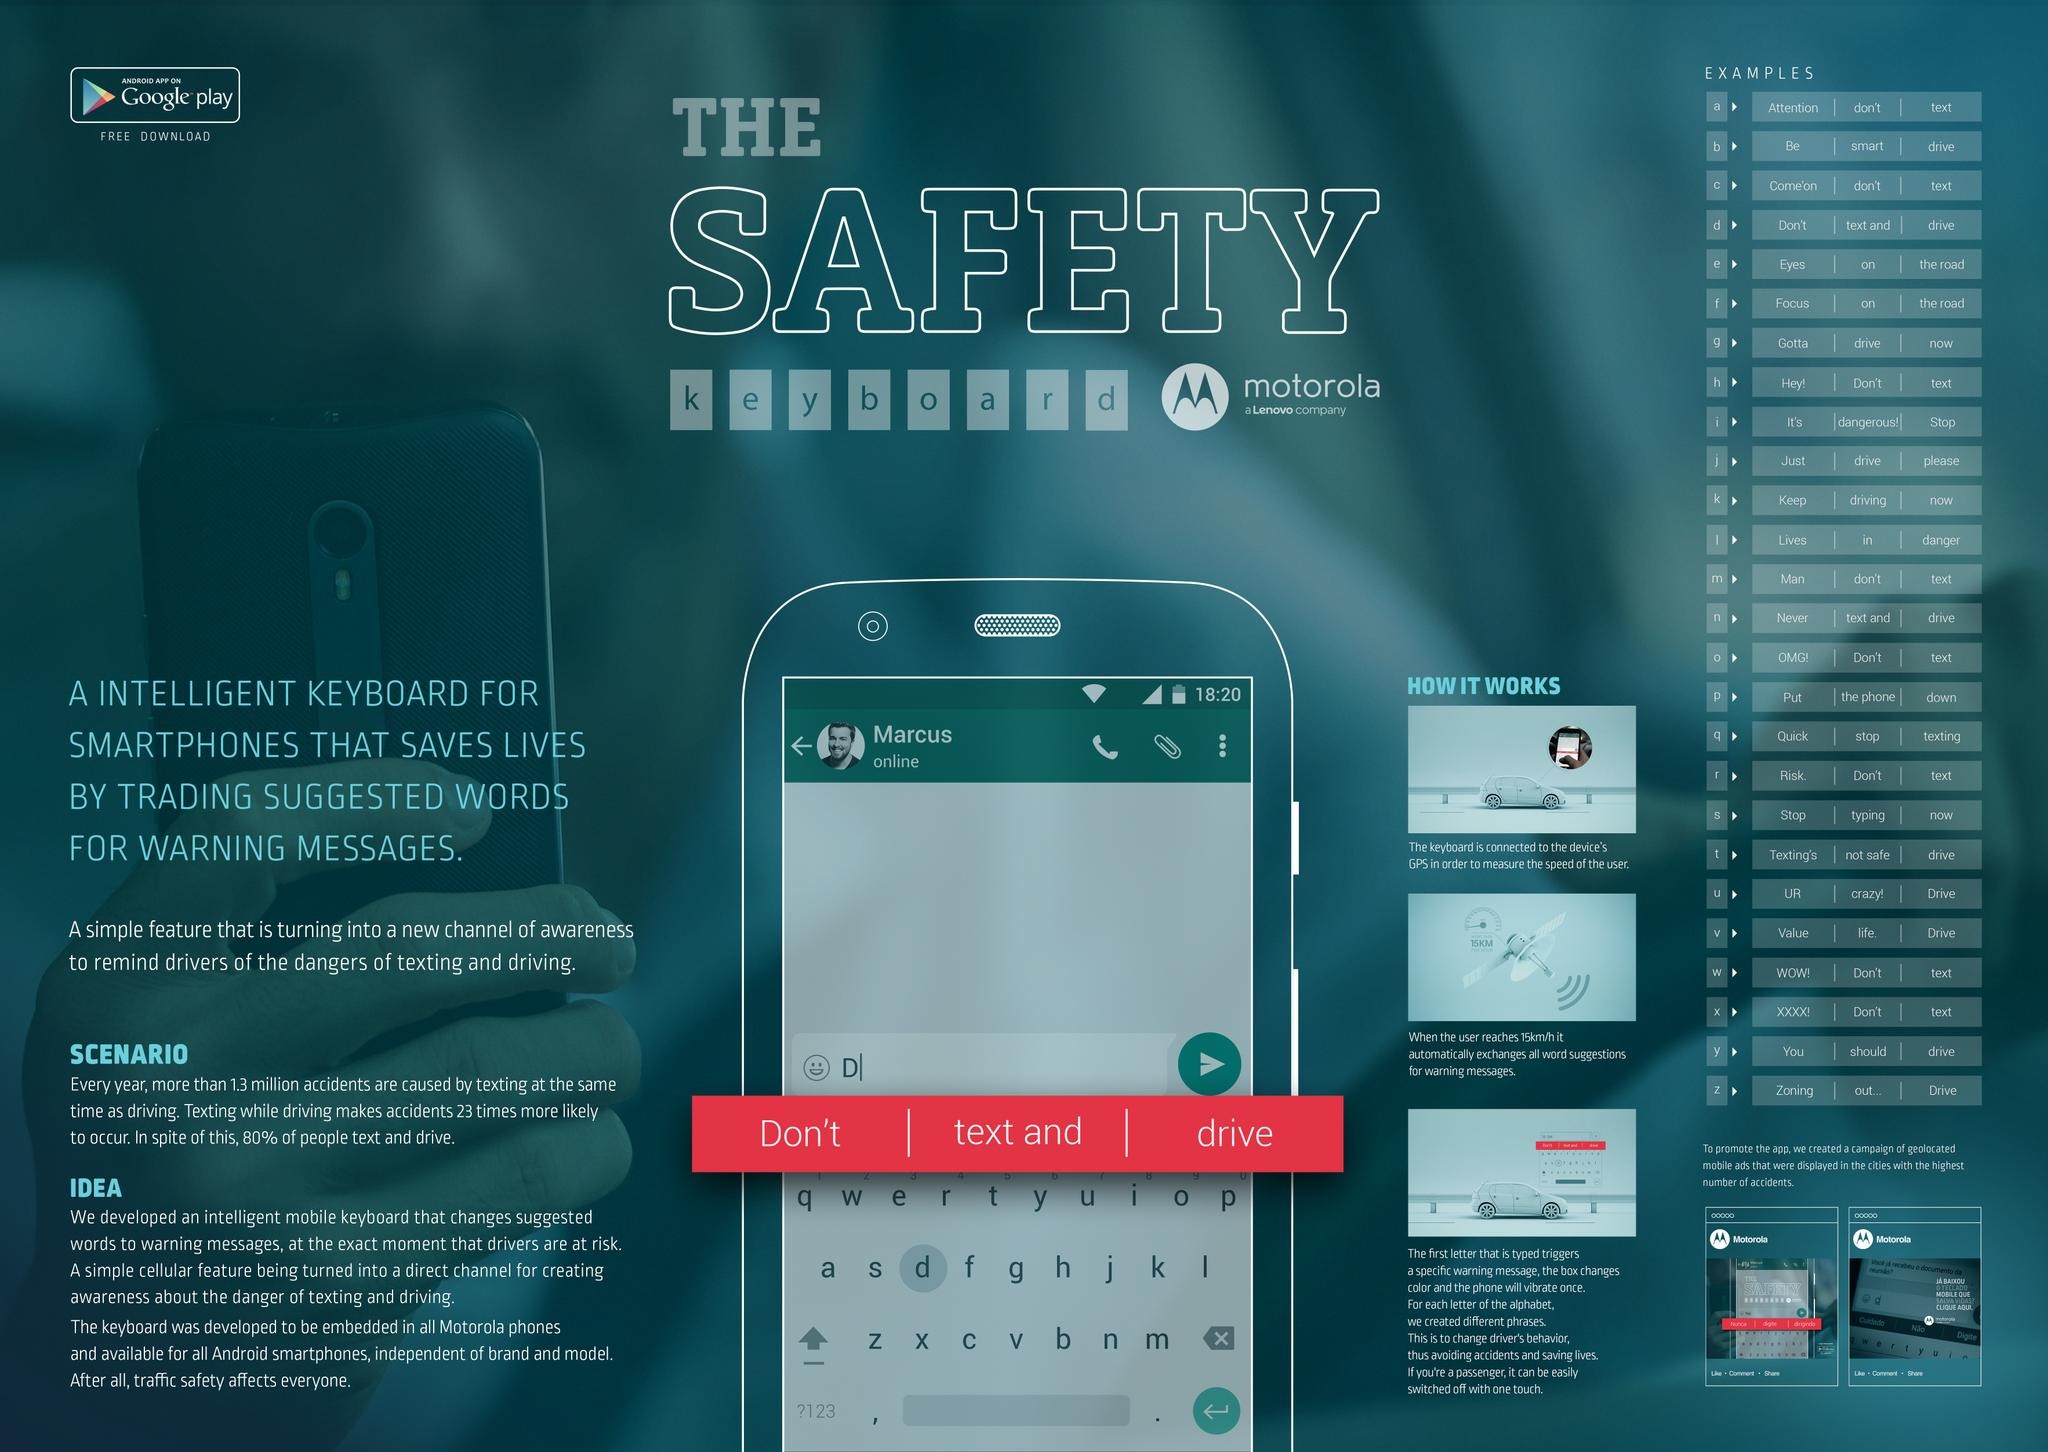 THE SAFETY KEYBOARD